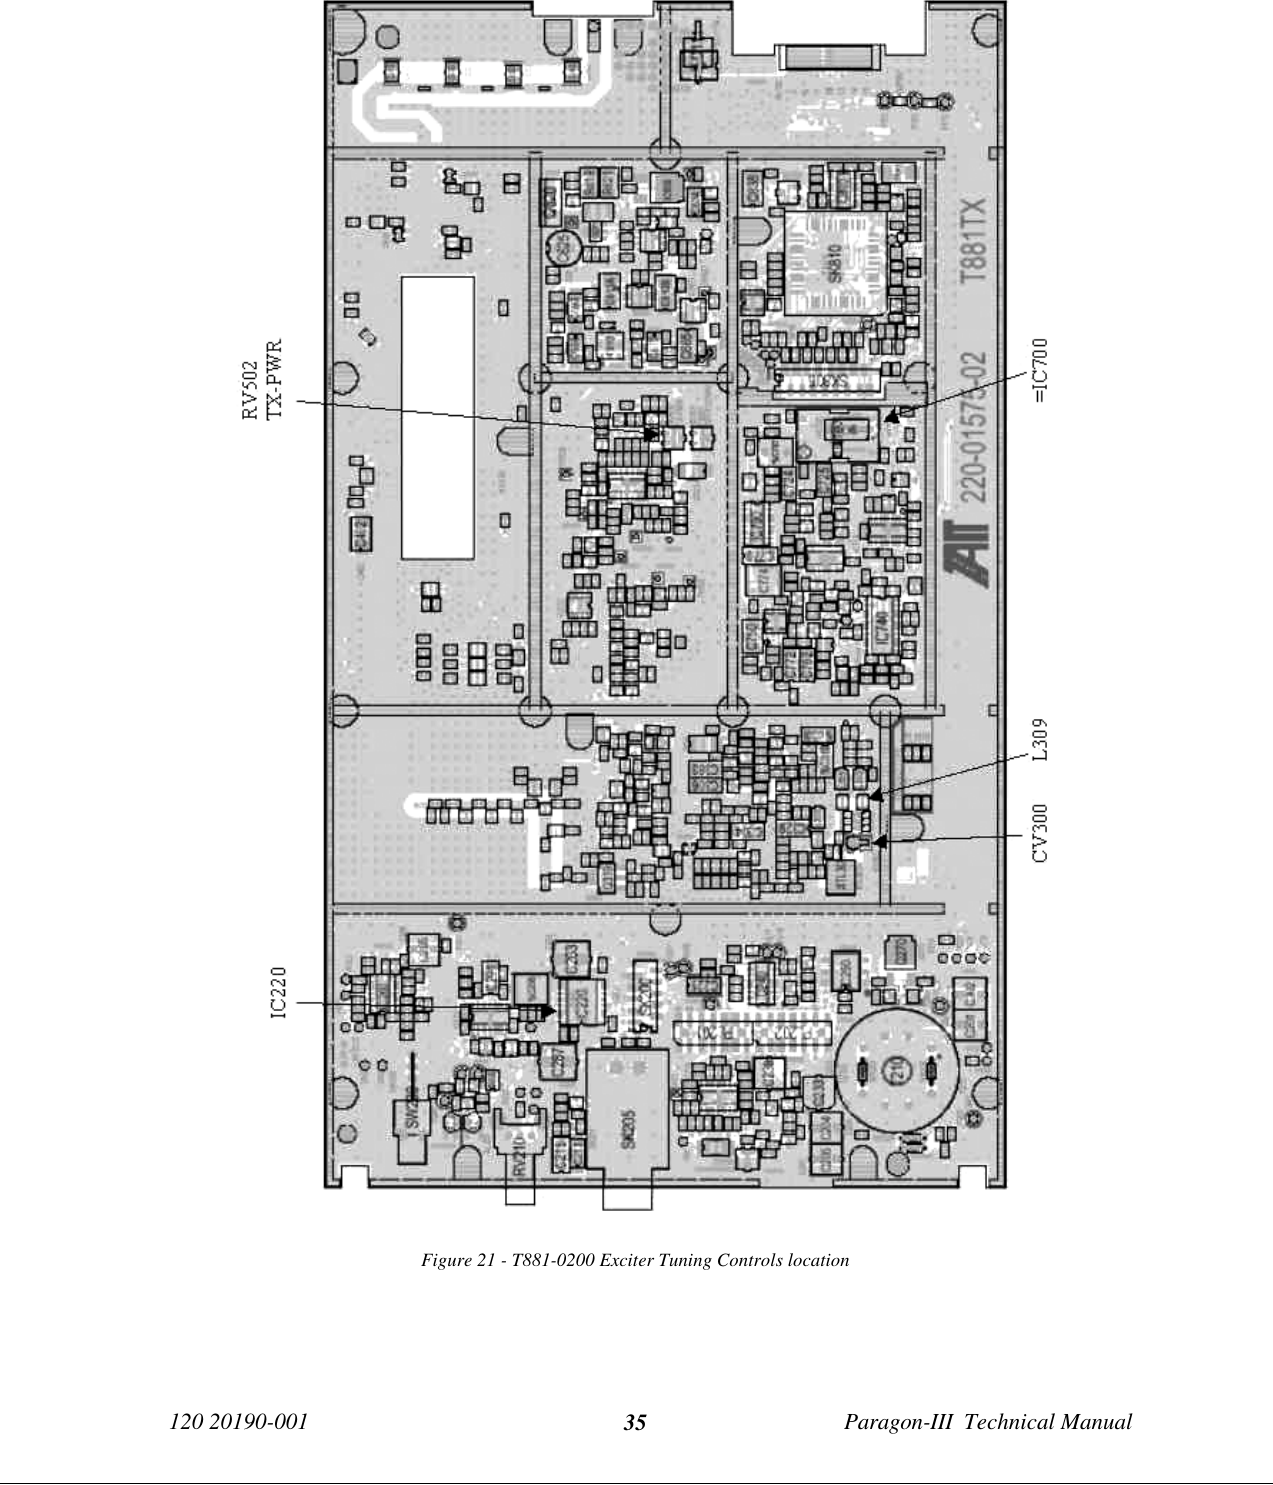 120 20190-001 Paragon-III  Technical Manual35Figure 21 - T881-0200 Exciter Tuning Controls location